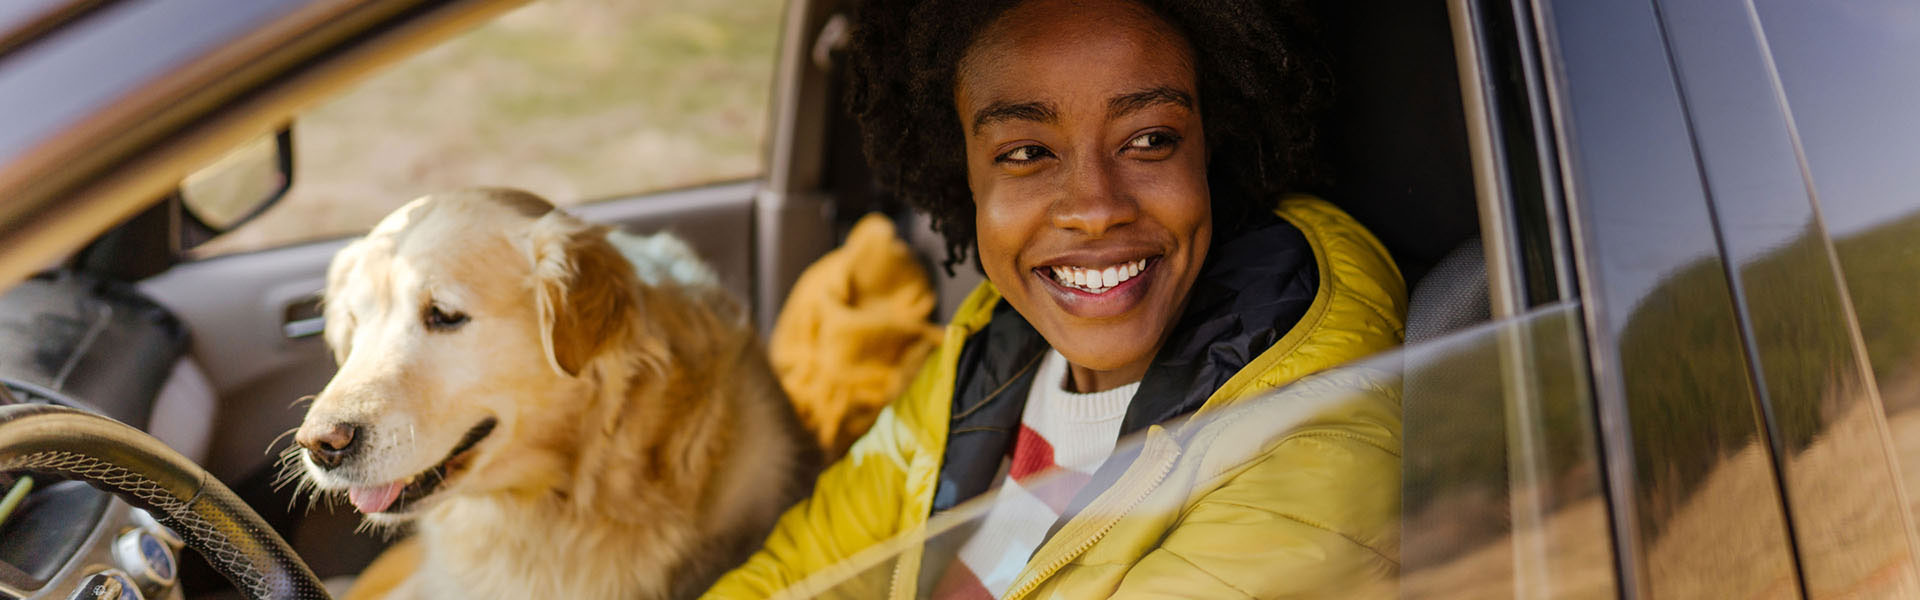 A young woman and a dog are in a car.	